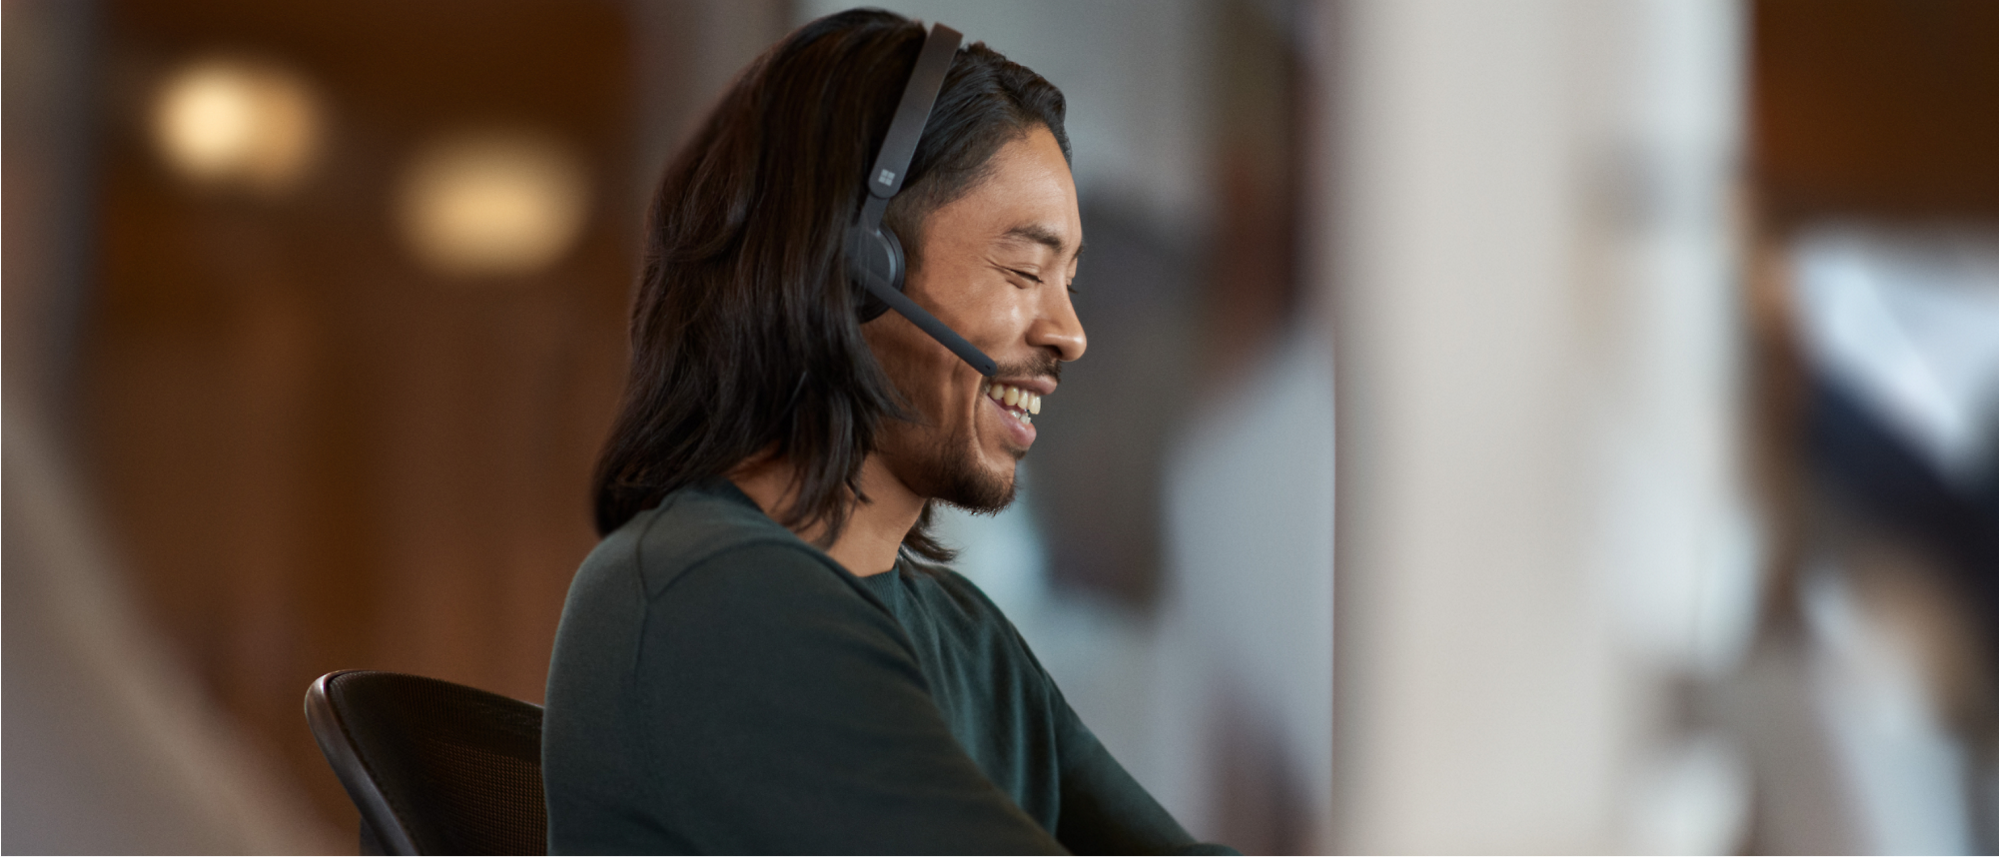 Asian man wearing a headset and smiling while working at a computer in a modern office.